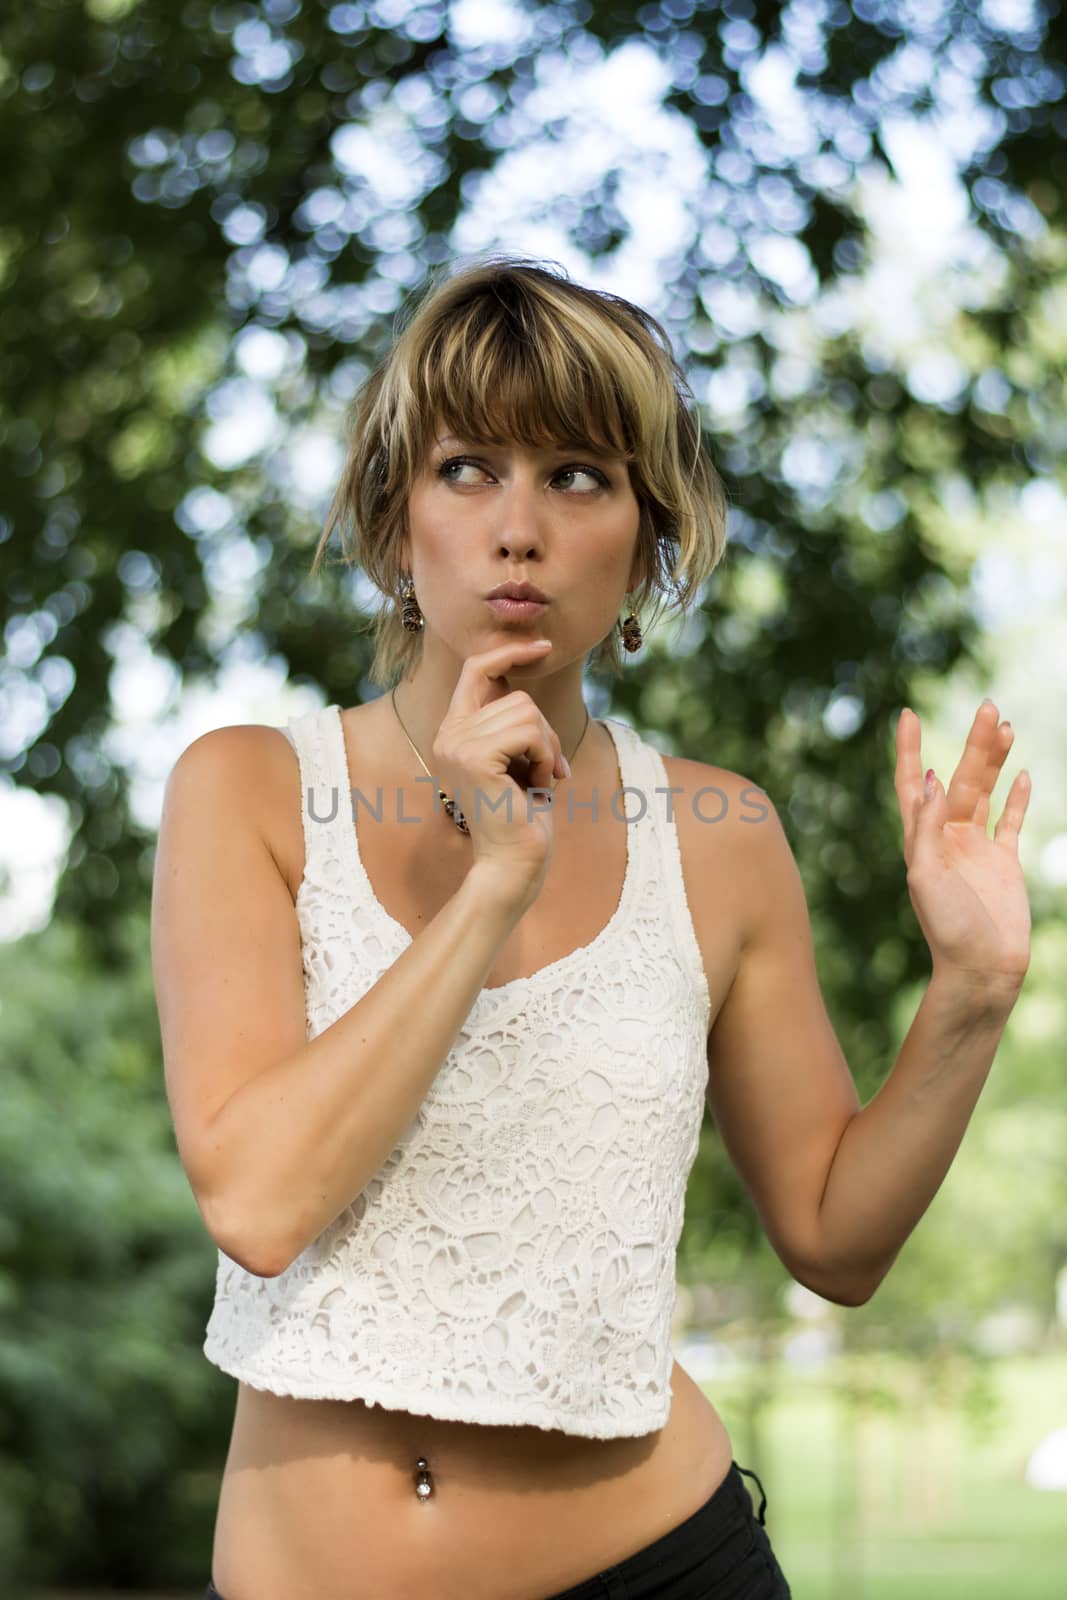  Attractive blonde young woman outdoors with funny expression on her face